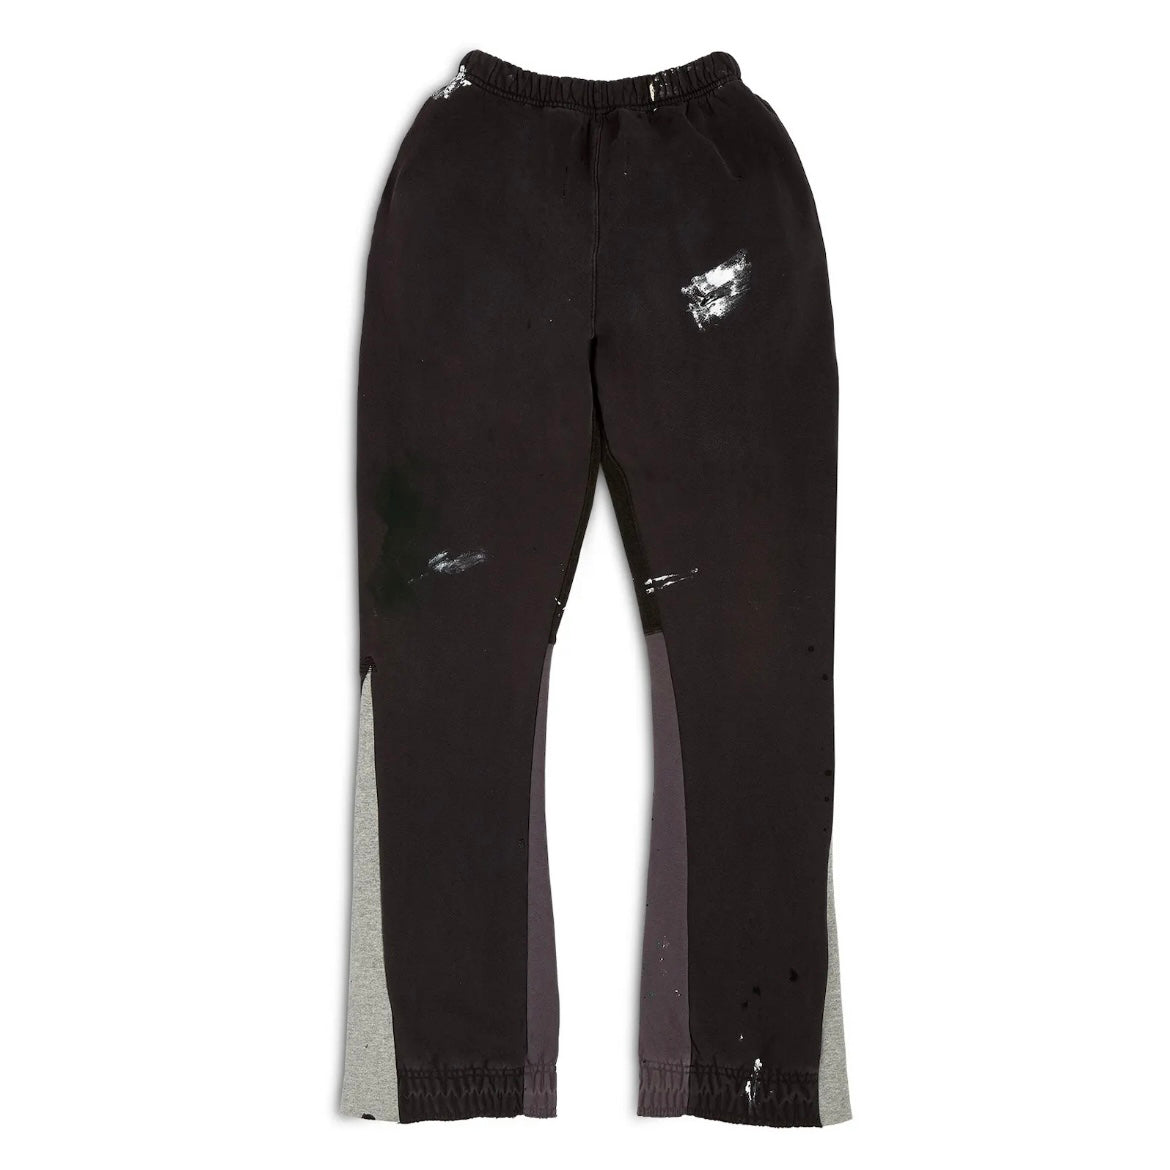 Gallery Dept. Painted Flared Sweat Pants Washed Black